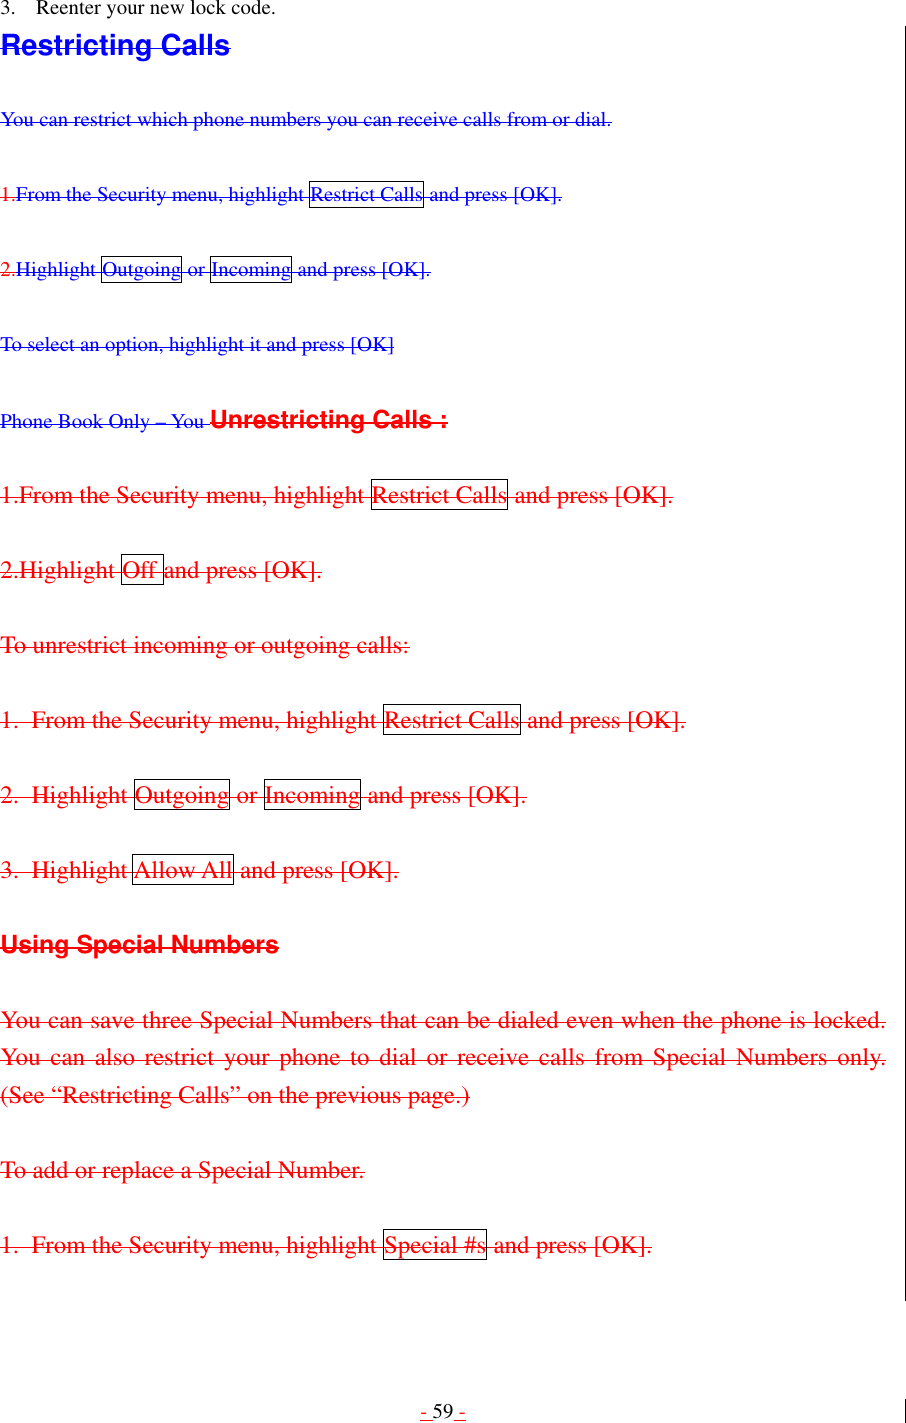 - 59 -  3.  Reenter your new lock code. Restricting Calls  You can restrict which phone numbers you can receive calls from or dial.  1.From the Security menu, highlight Restrict Calls and press [OK].  2.Highlight Outgoing or Incoming and press [OK].  To select an option, highlight it and press [OK]  Phone Book Only – You Unrestricting Calls :  1.From the Security menu, highlight Restrict Calls and press [OK].  2.Highlight Off and press [OK].  To unrestrict incoming or outgoing calls:  1. From the Security menu, highlight Restrict Calls and press [OK].  2. Highlight Outgoing or Incoming and press [OK].  3. Highlight Allow All and press [OK].  Using Special Numbers  You can save three Special Numbers that can be dialed even when the phone is locked. You can also restrict your phone to dial or receive calls from Special Numbers only. (See “Restricting Calls” on the previous page.)  To add or replace a Special Number.  1.  From the Security menu, highlight Special #s and press [OK].  